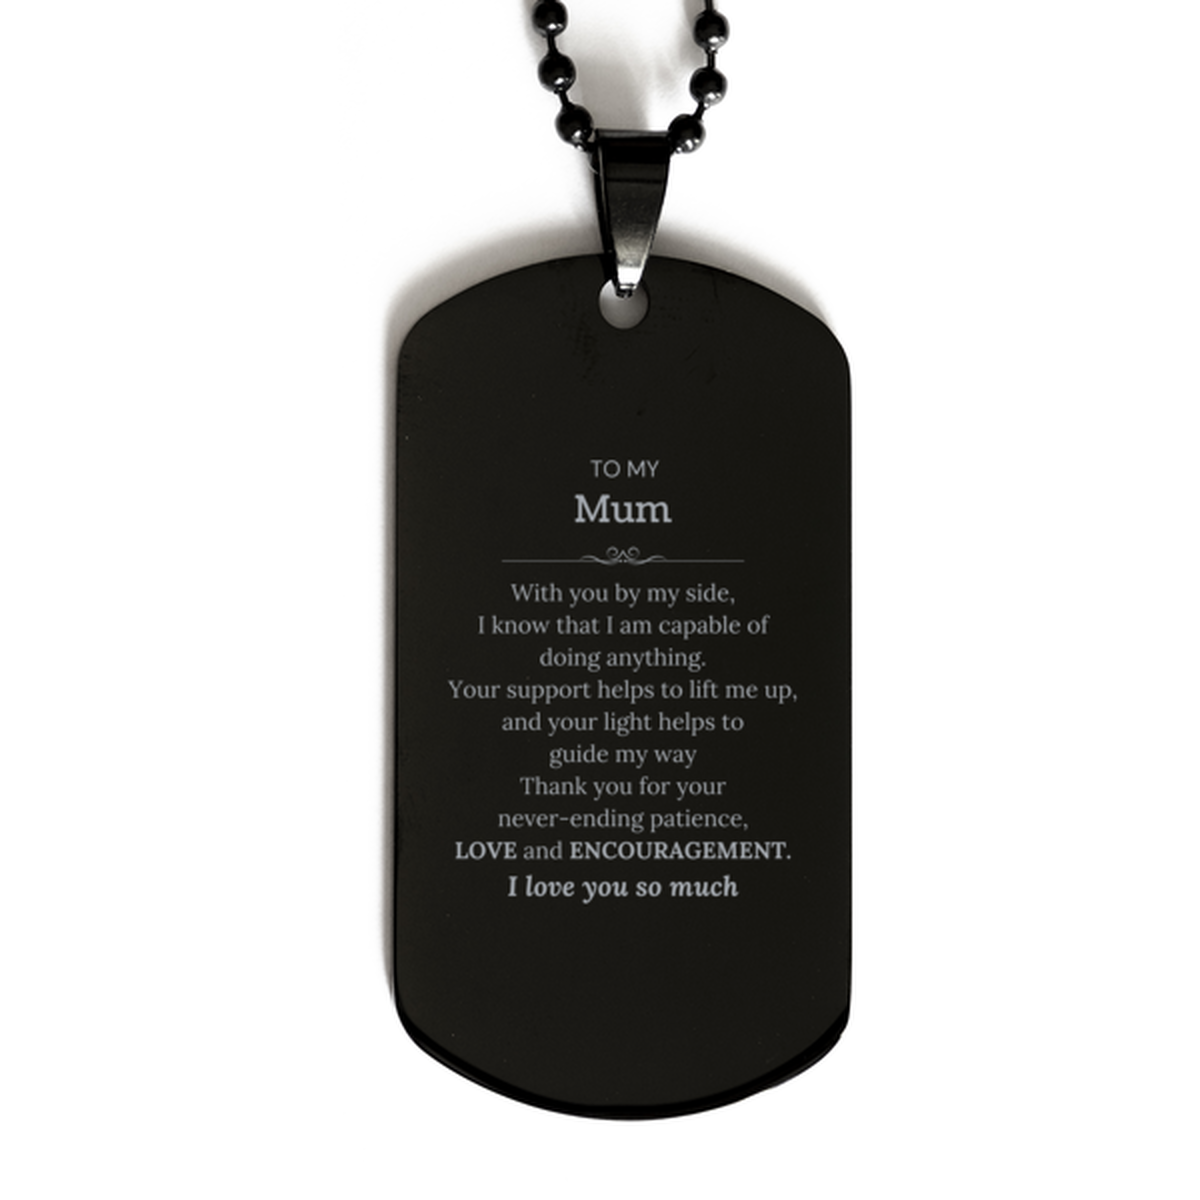 Appreciation Mum Black Dog Tag Gifts, To My Mum Birthday Christmas Wedding Keepsake Gifts for Mum With you by my side, I know that I am capable of doing anything. I love you so much